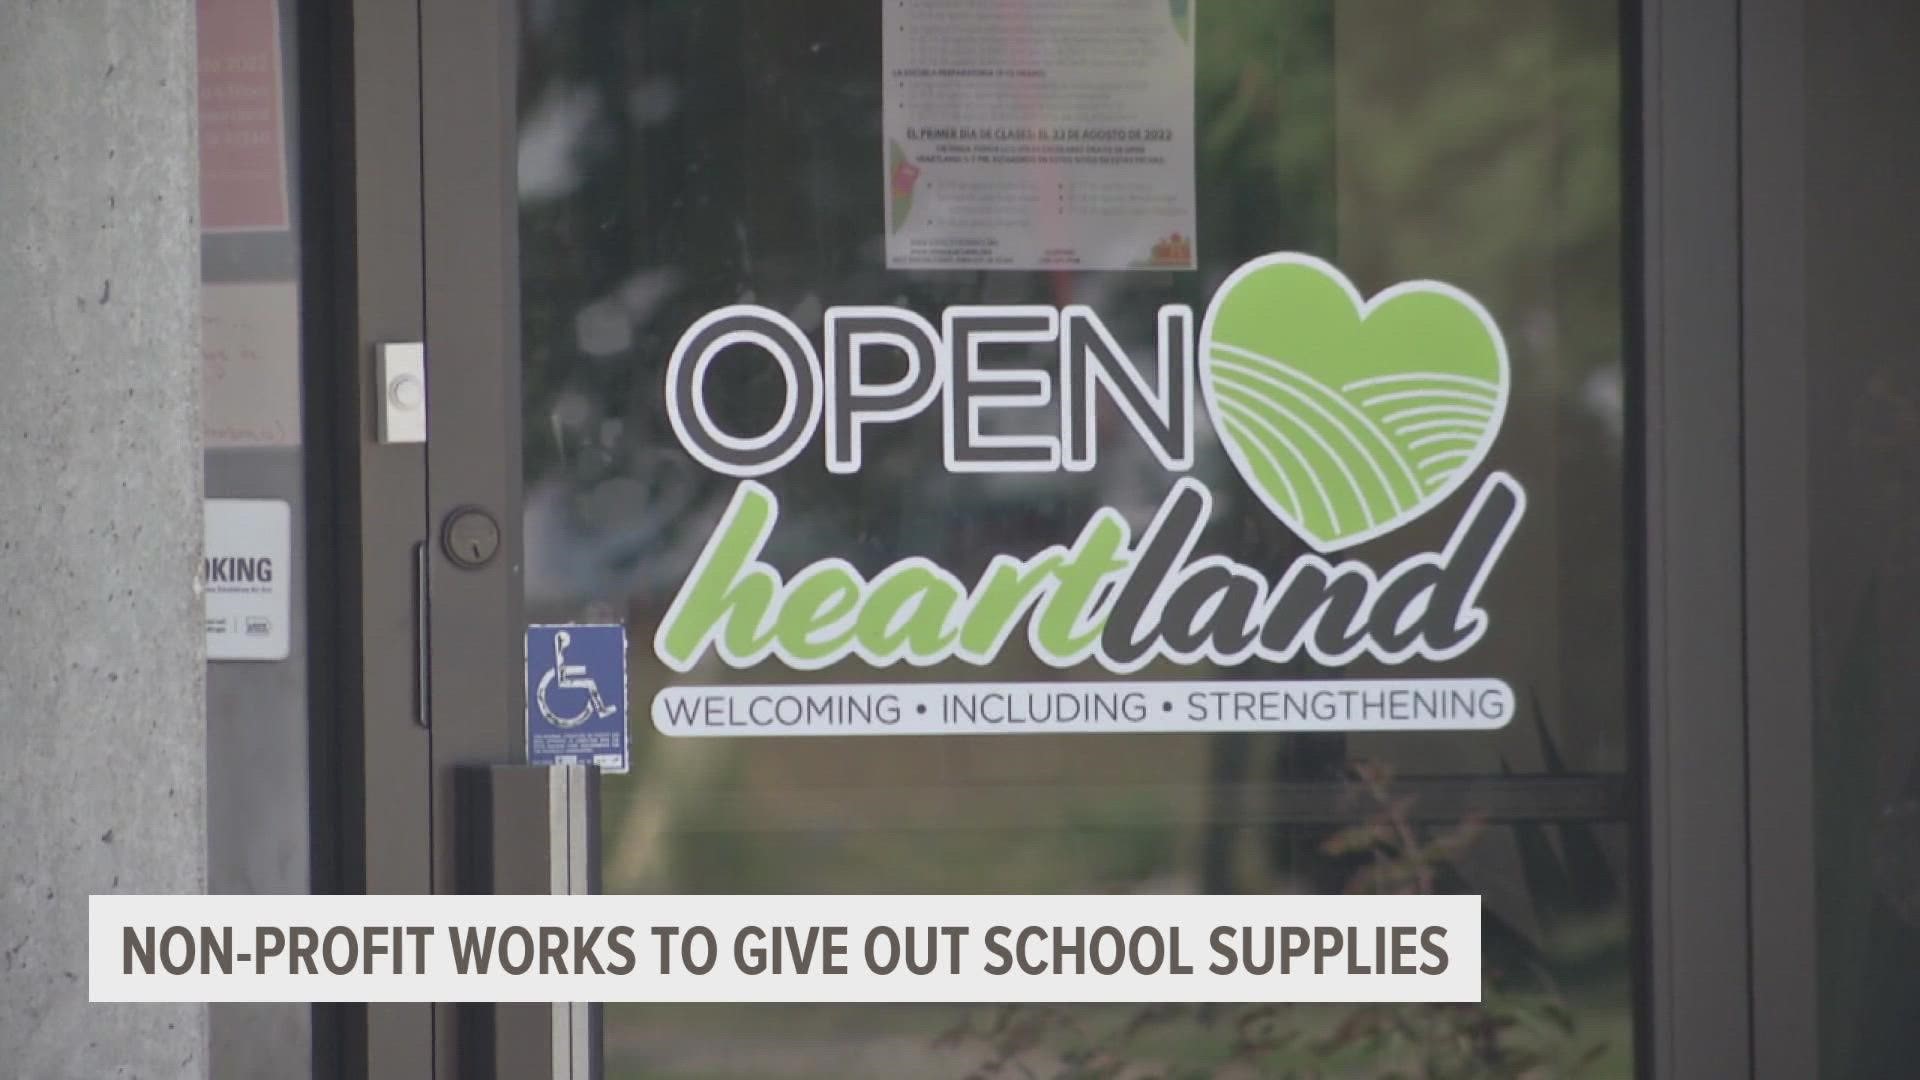 Iowa City-based Open Heartland plans to give out a full list of supplies to at least 1,000 students in Eastern Iowa.